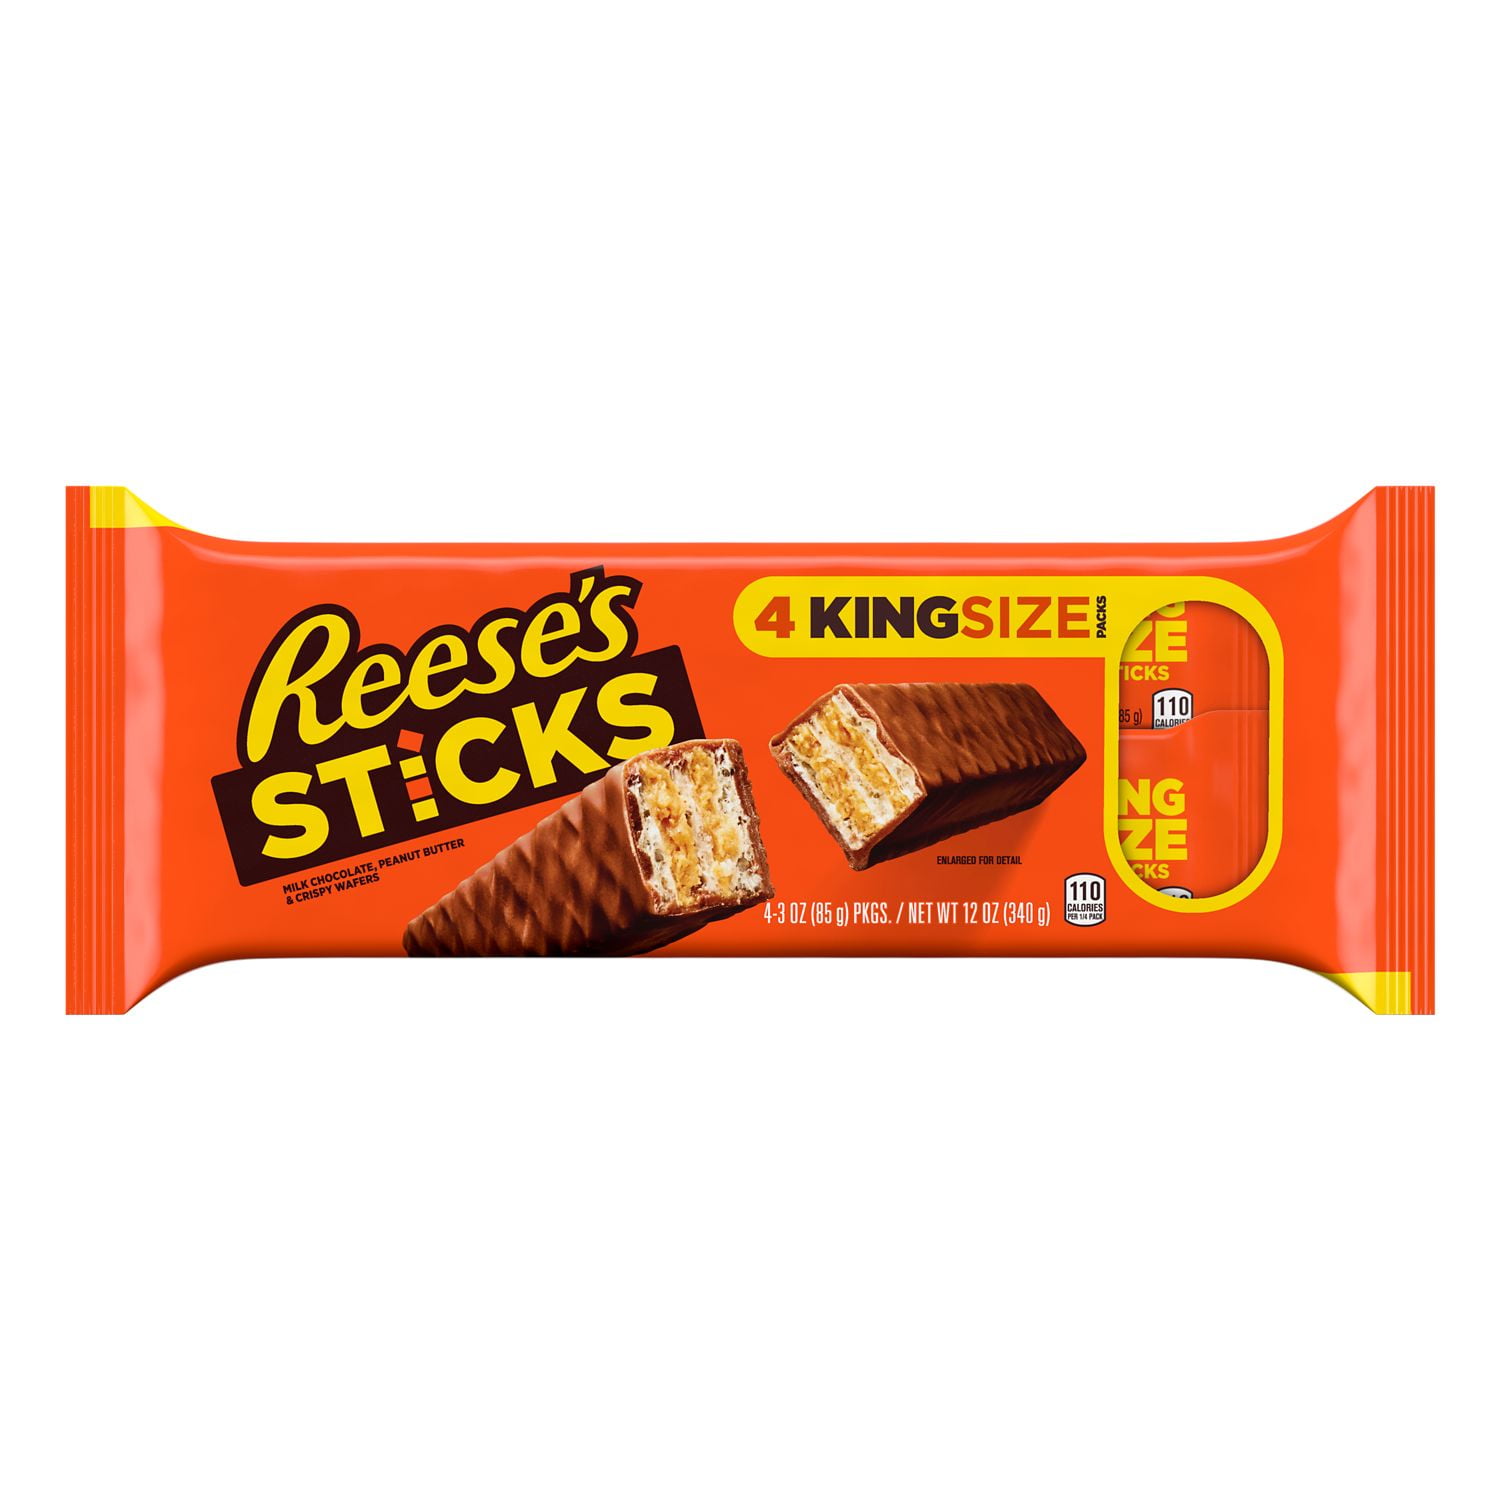 Reese's, Sticks Milk Chocolate, Peanut Butter and Crisp Wafers Candy Bars, Individually Wrapped, 3 oz, King Size Packs 4 Ct